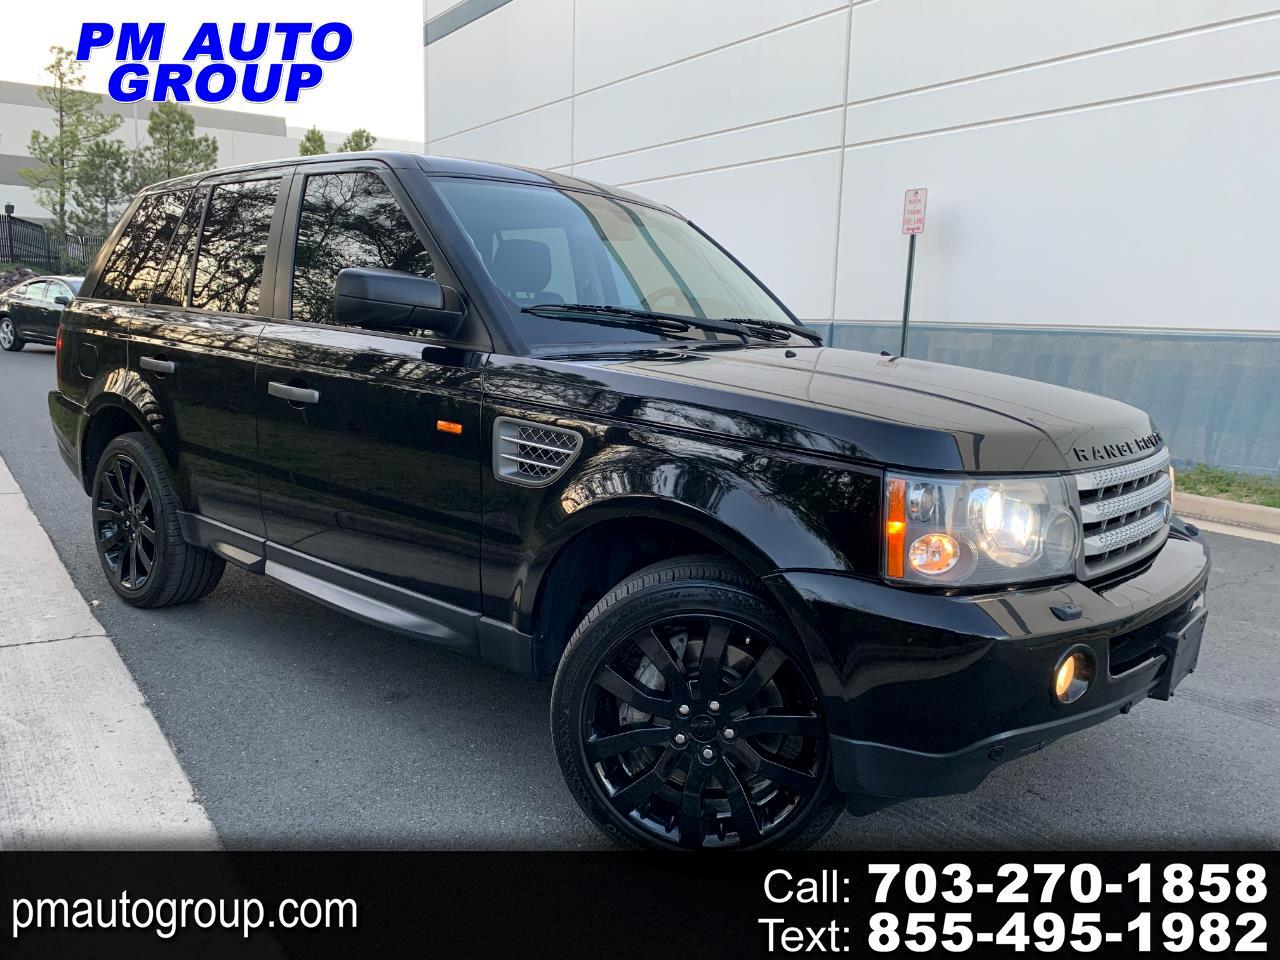 Used 2008 Land Rover Range Rover Sport 4WD 4dr SC for Sale in Chantilly VA  20152 PM Auto Group LLC